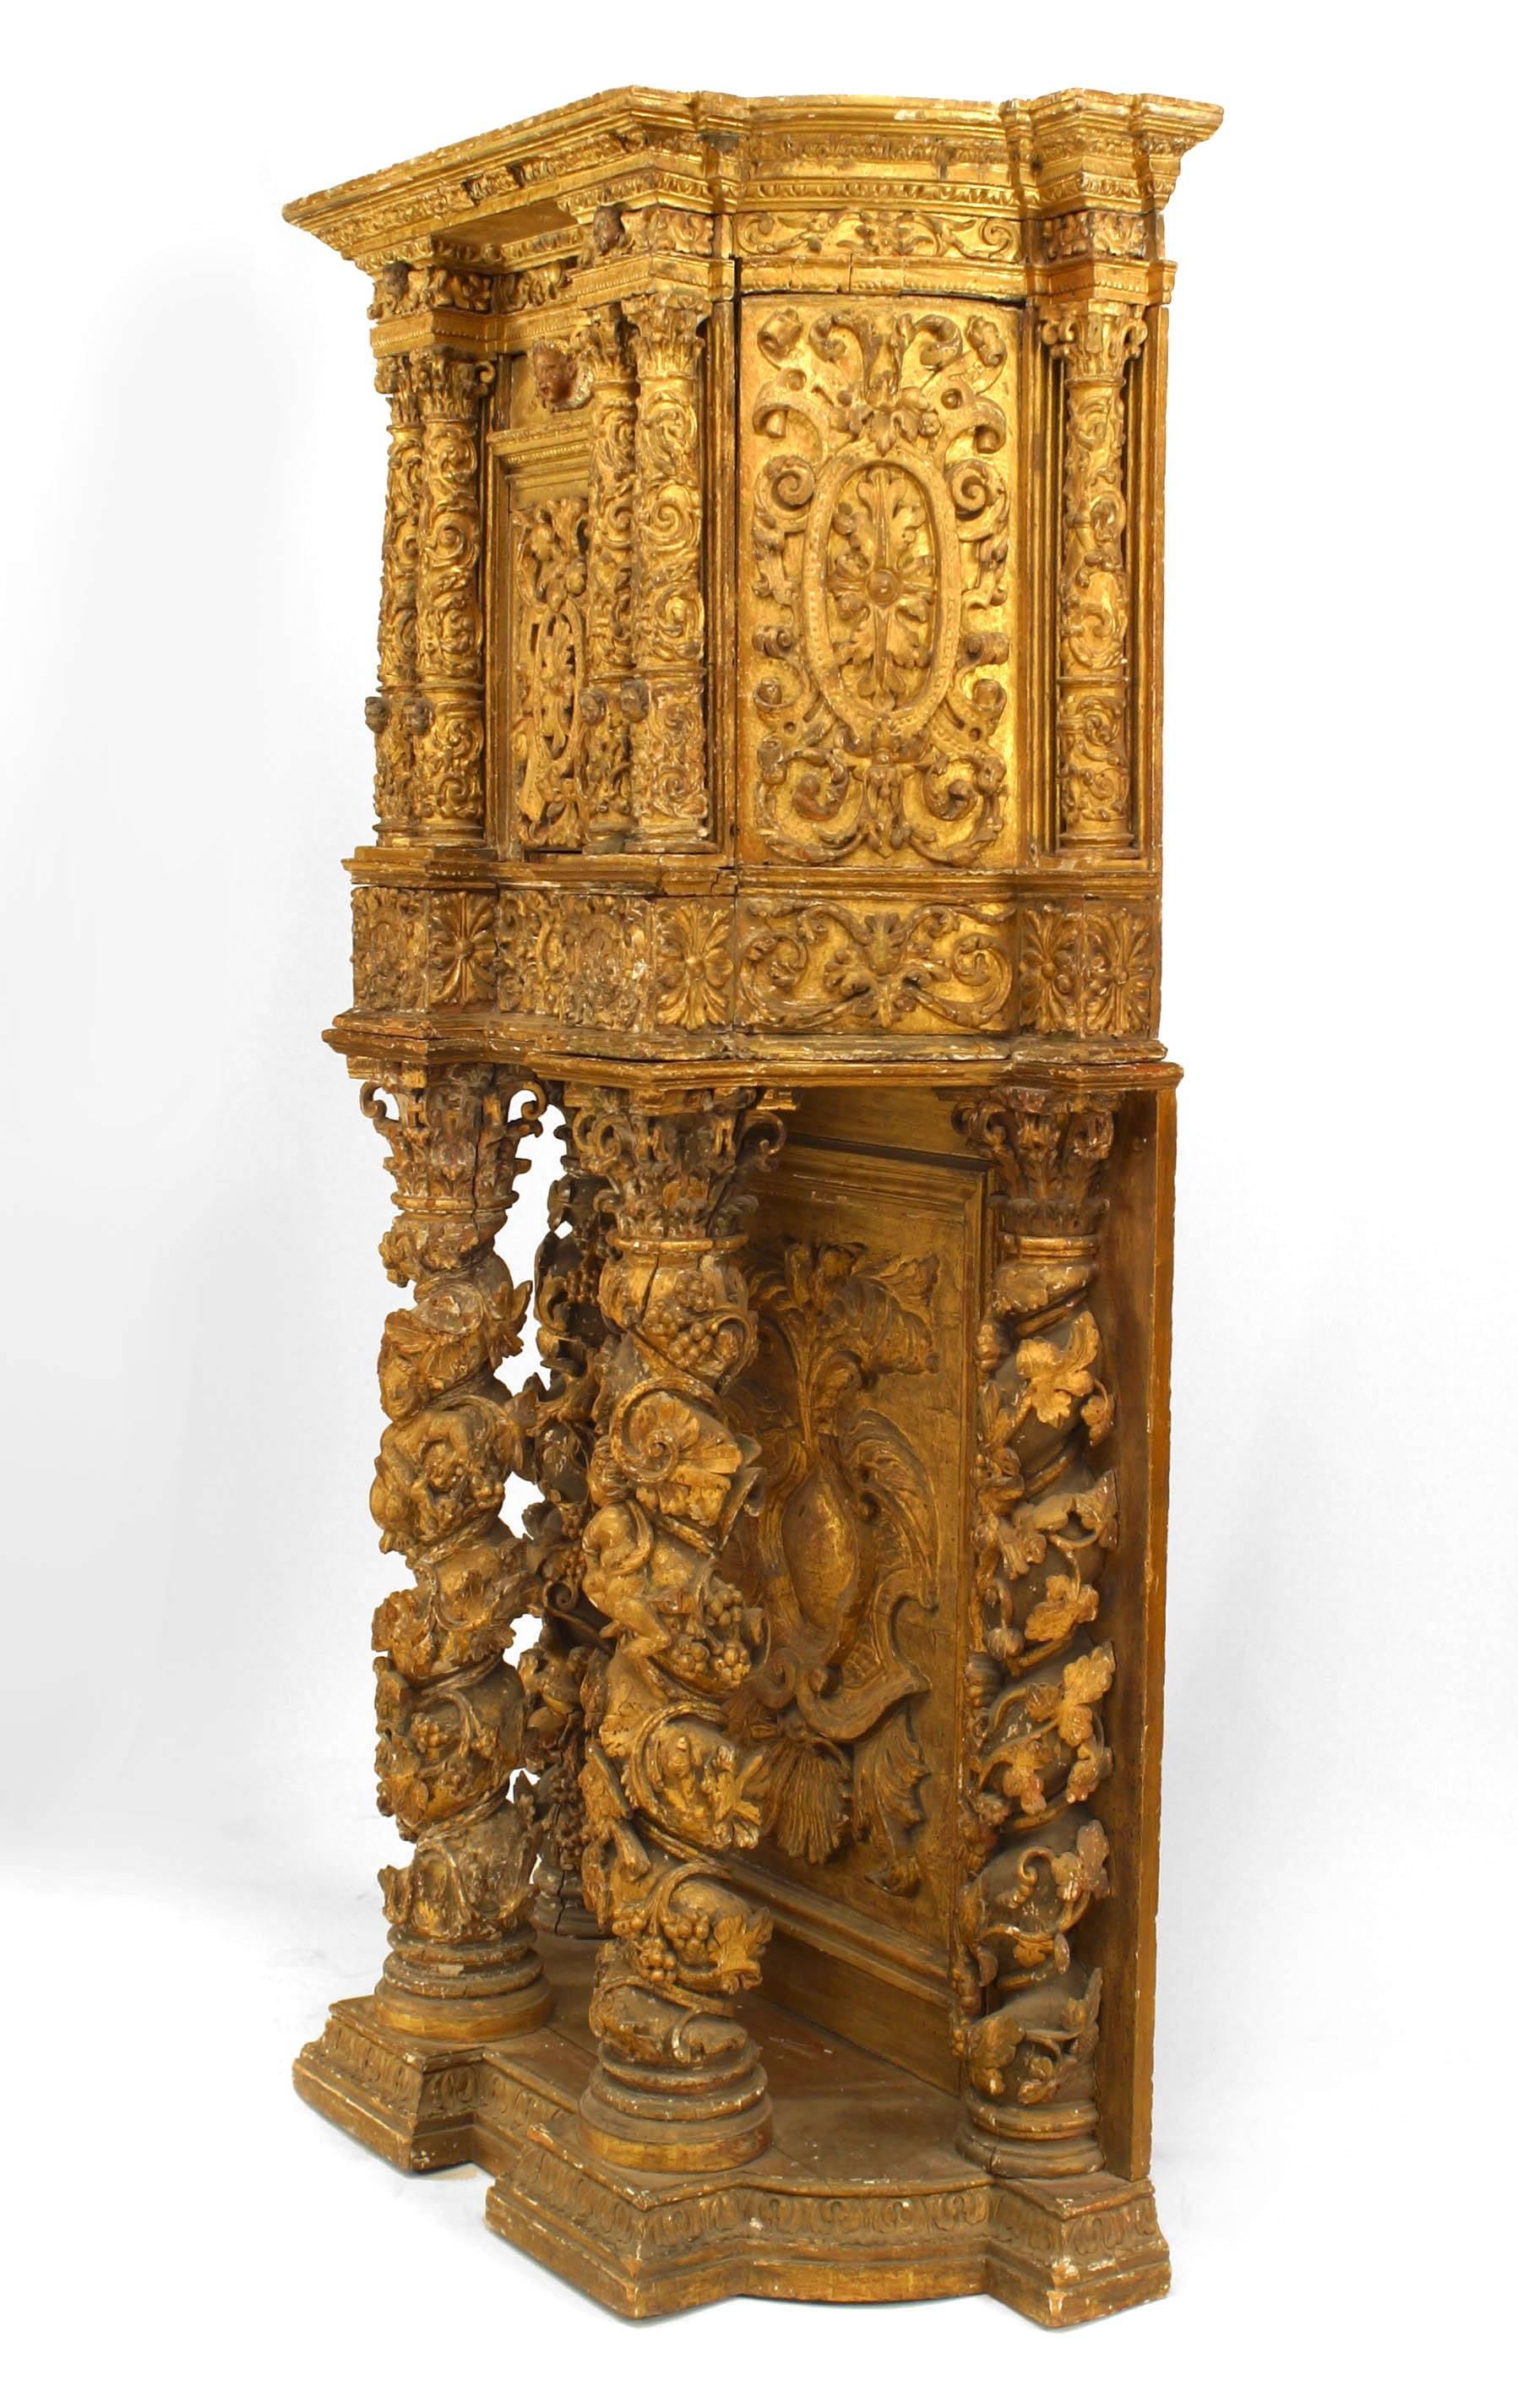 Italian Venetian (17th Century) carved and gilt cabinet with columns on base and cupid heads with 1 door.
